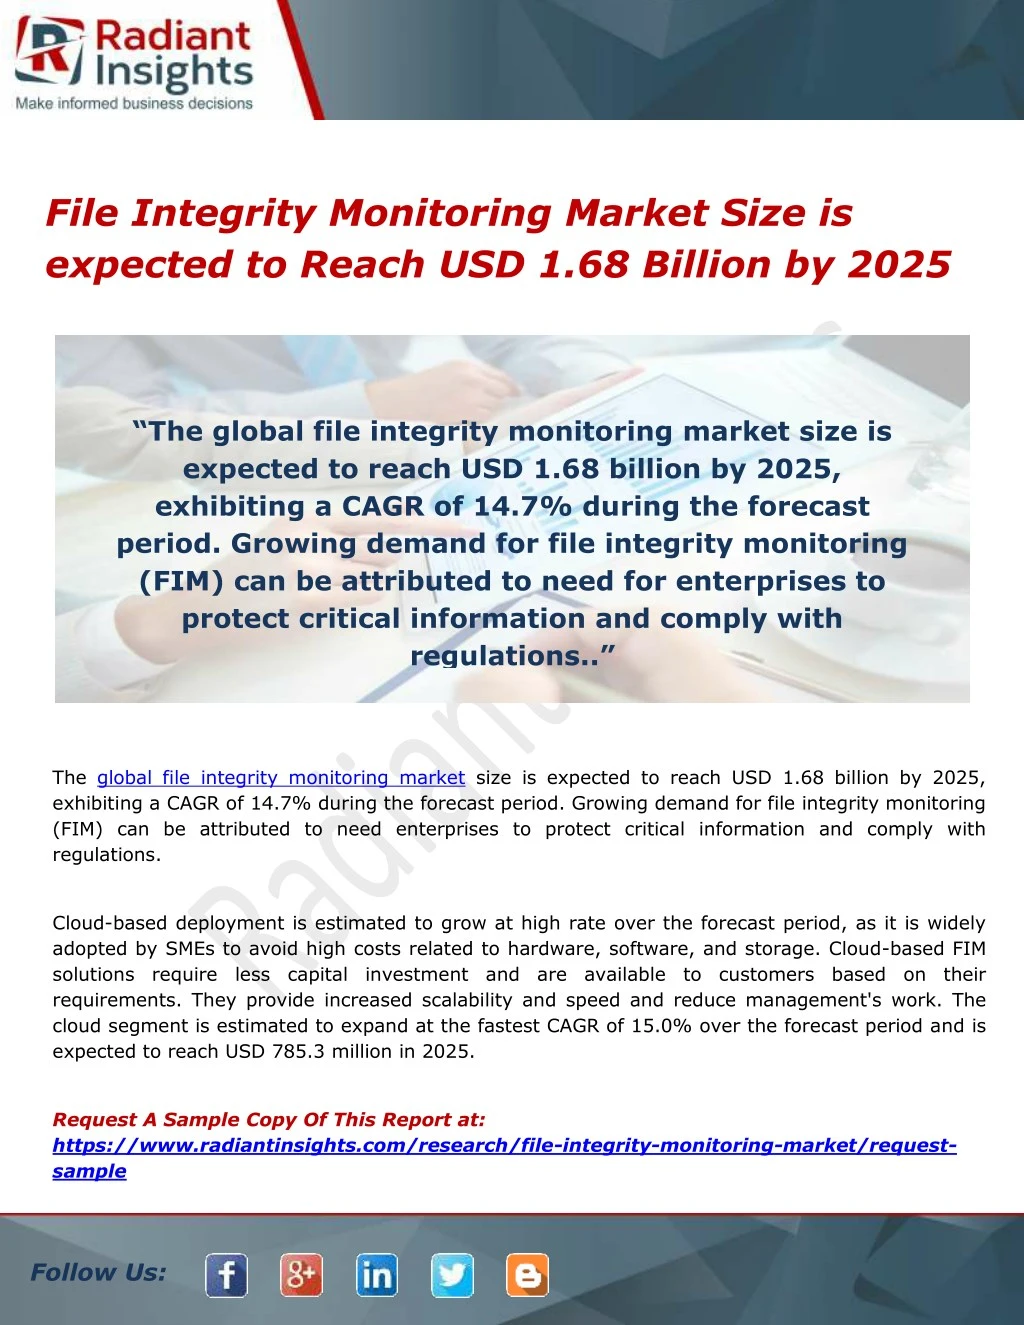 file integrity monitoring market size is expected